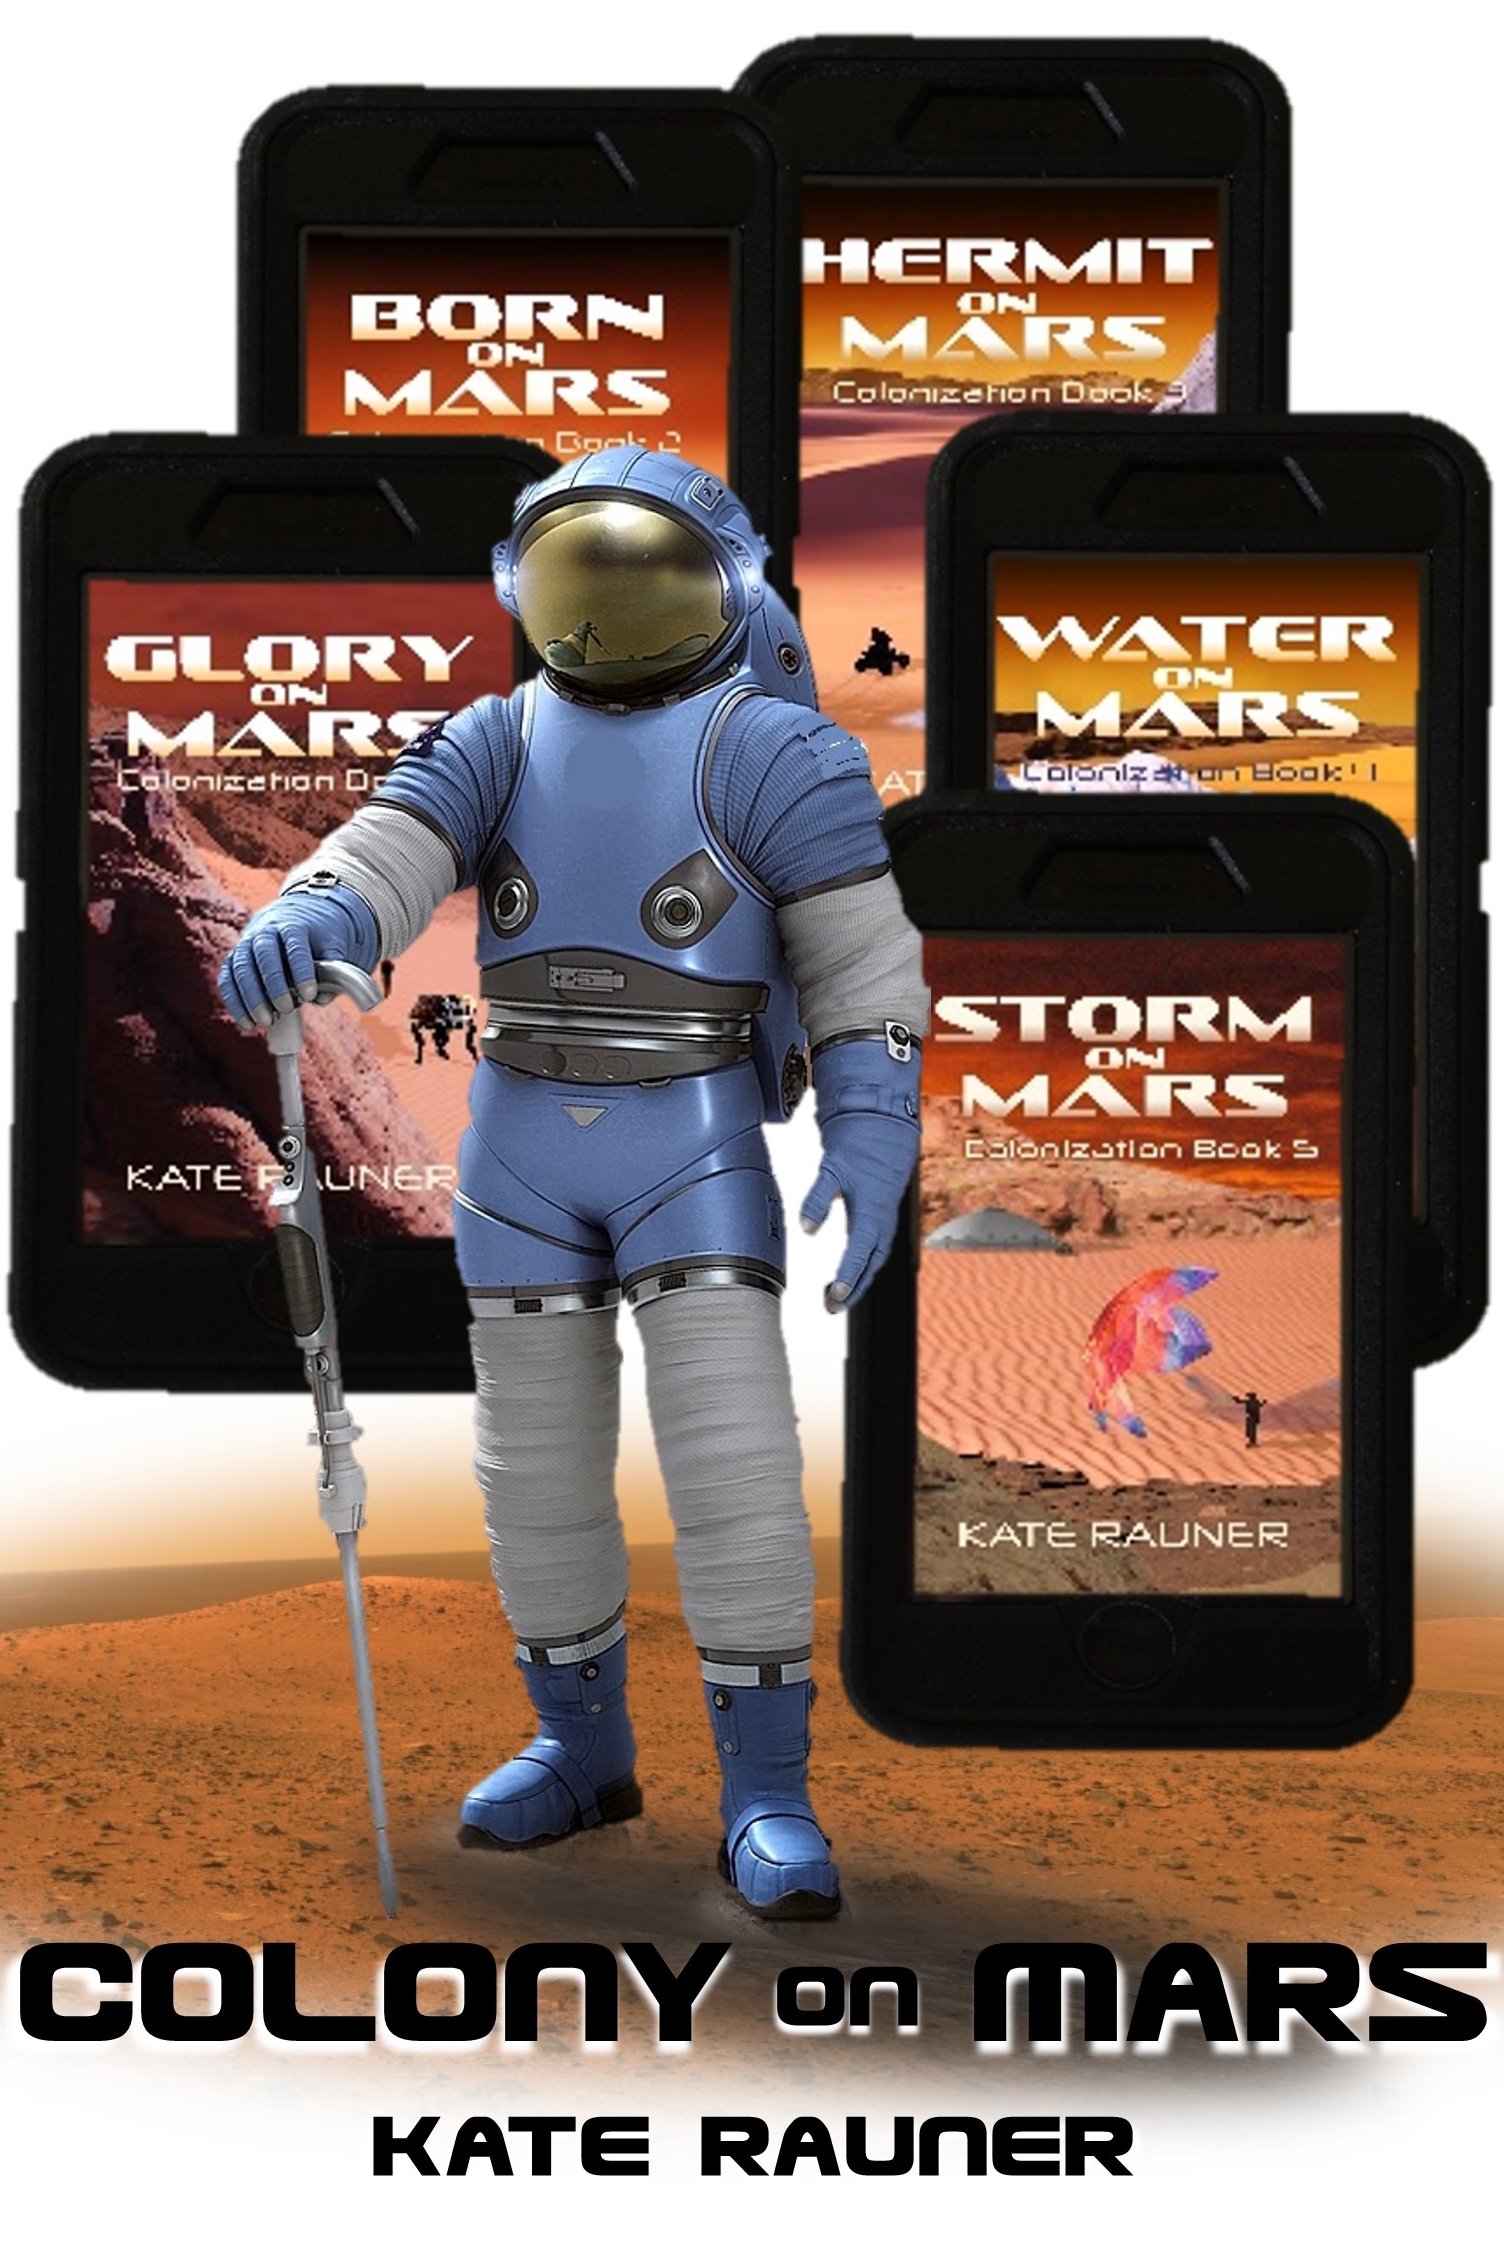 Colony on Mars bok covers